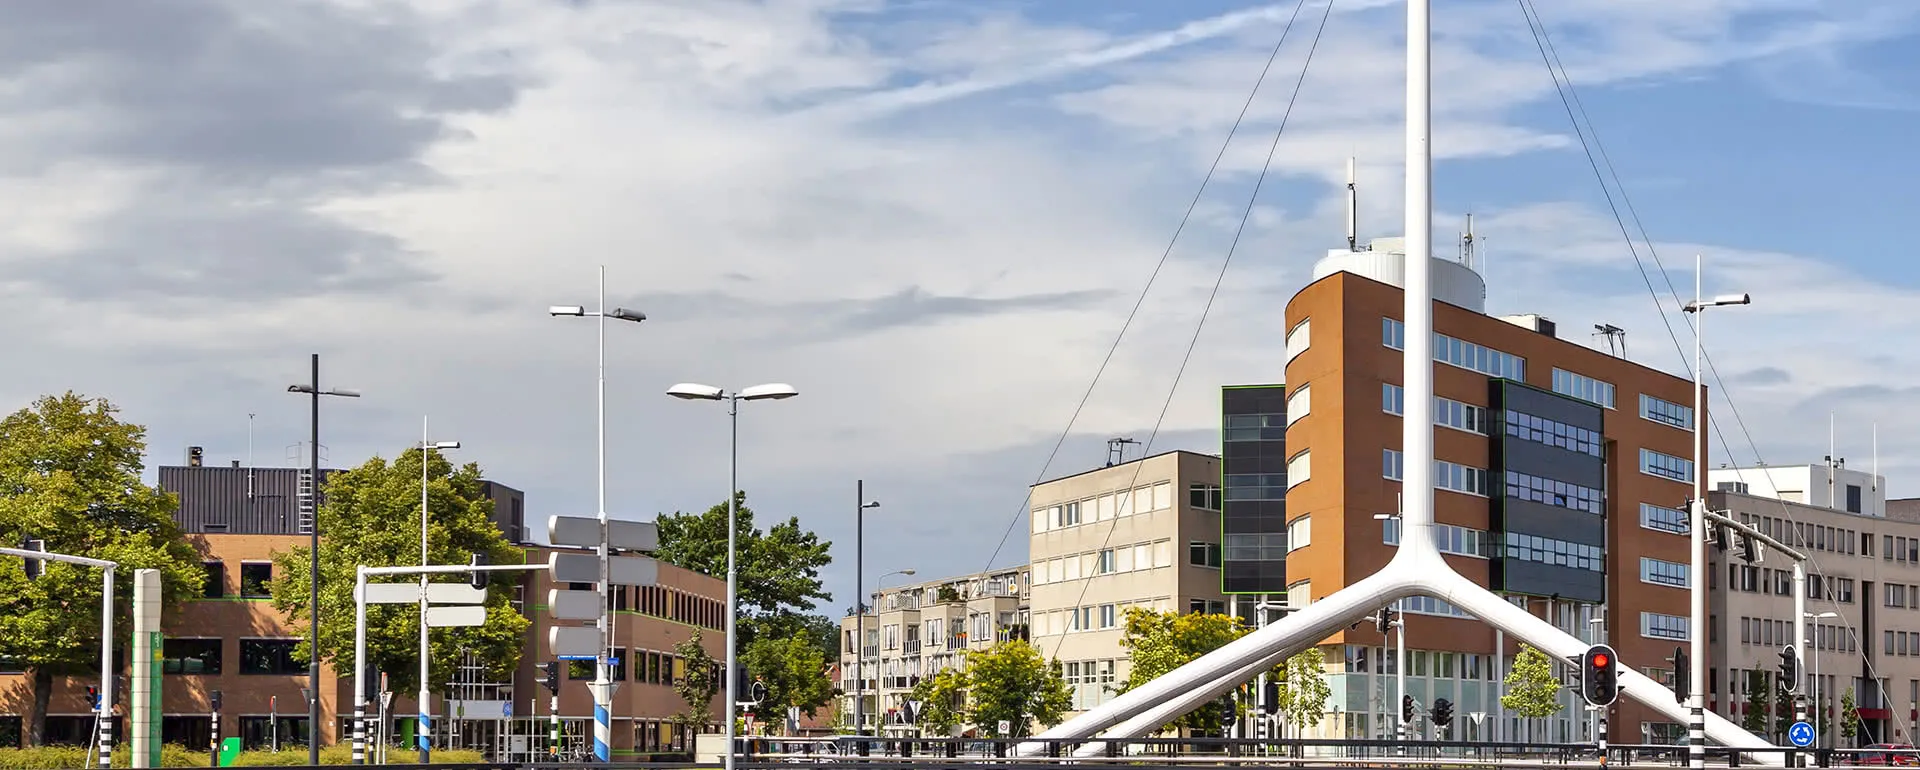 Eindhoven - the destination with youth hostels